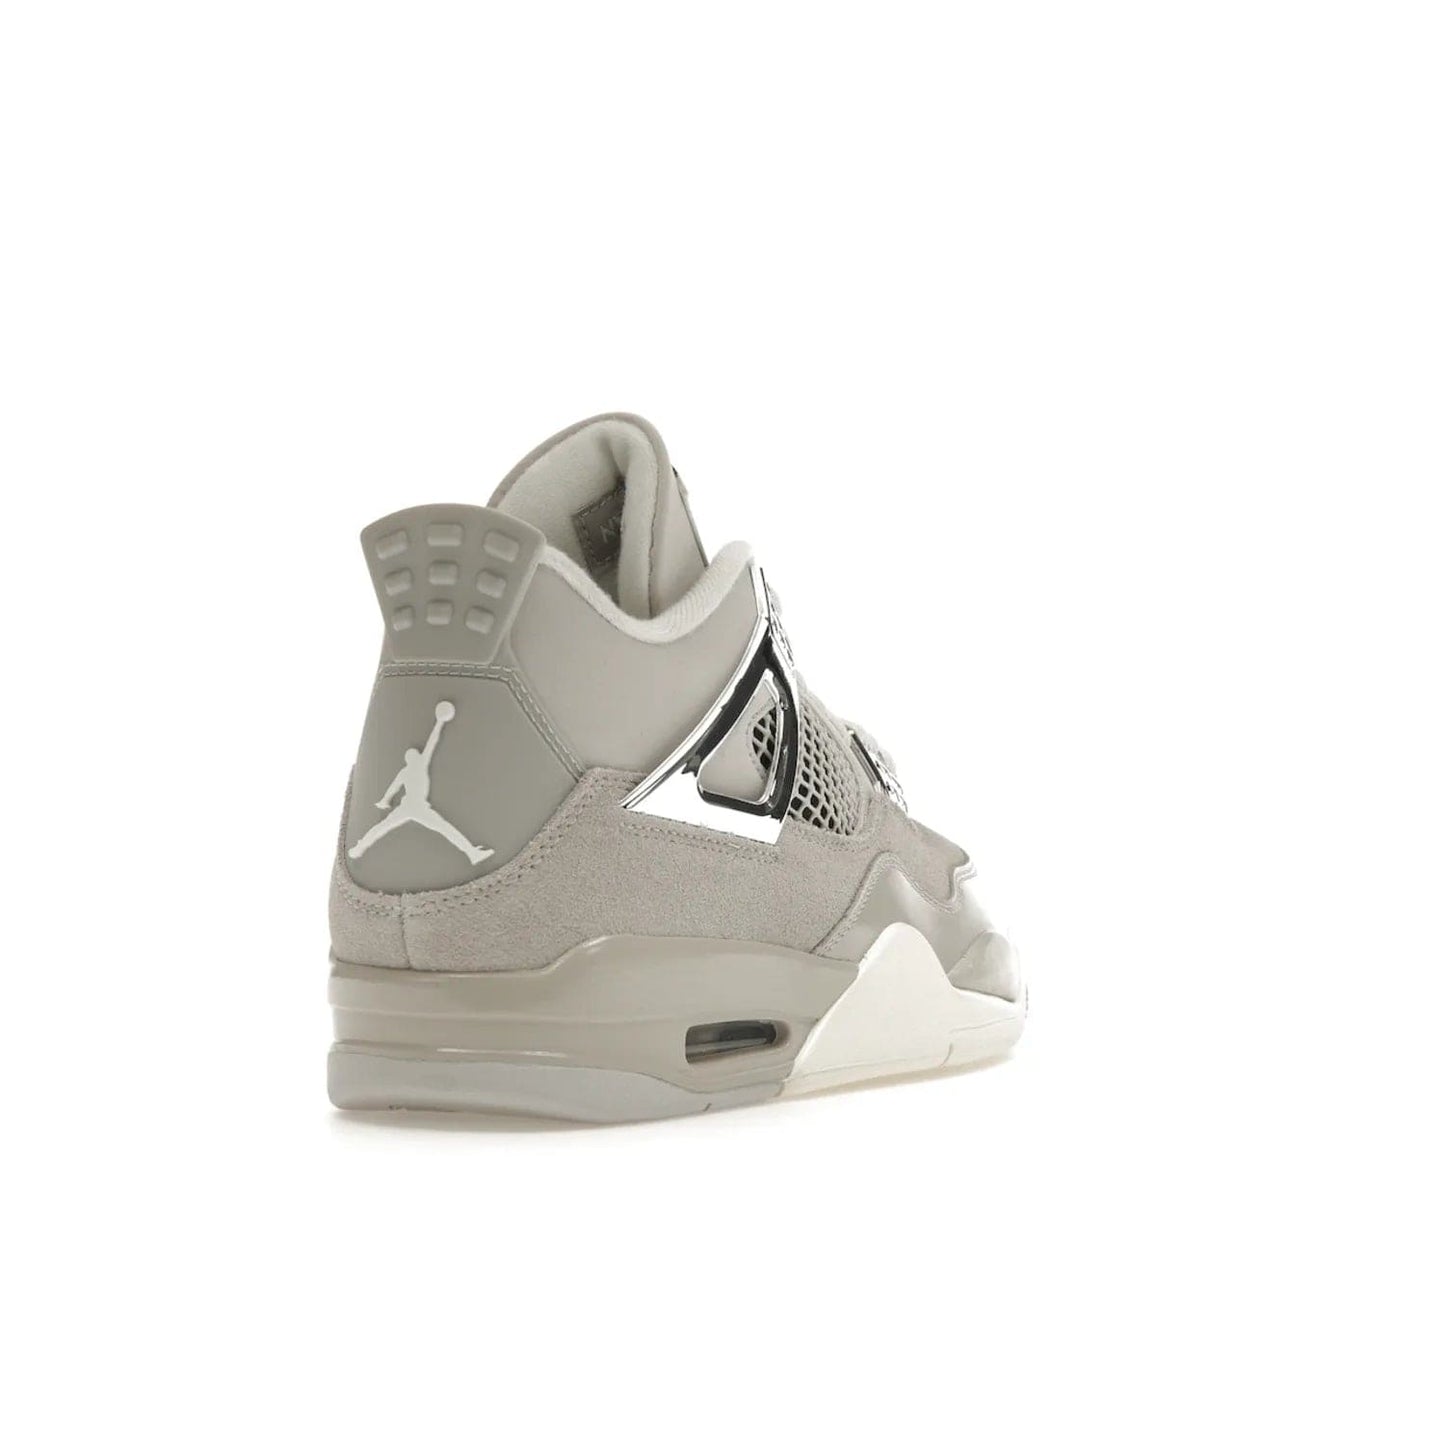 Jordan 4 Retro Frozen Moments (Women's) - Image 31 - Only at www.BallersClubKickz.com - The Jordan 4 Retro Frozen Moments is a stylish blend of classic design elements and modern tones. Featuring suede and leather overlays in a light iron-ore, sail, neutral grey, black, and metallic silver colorway. Get this iconic high-performance sneaker for $210.